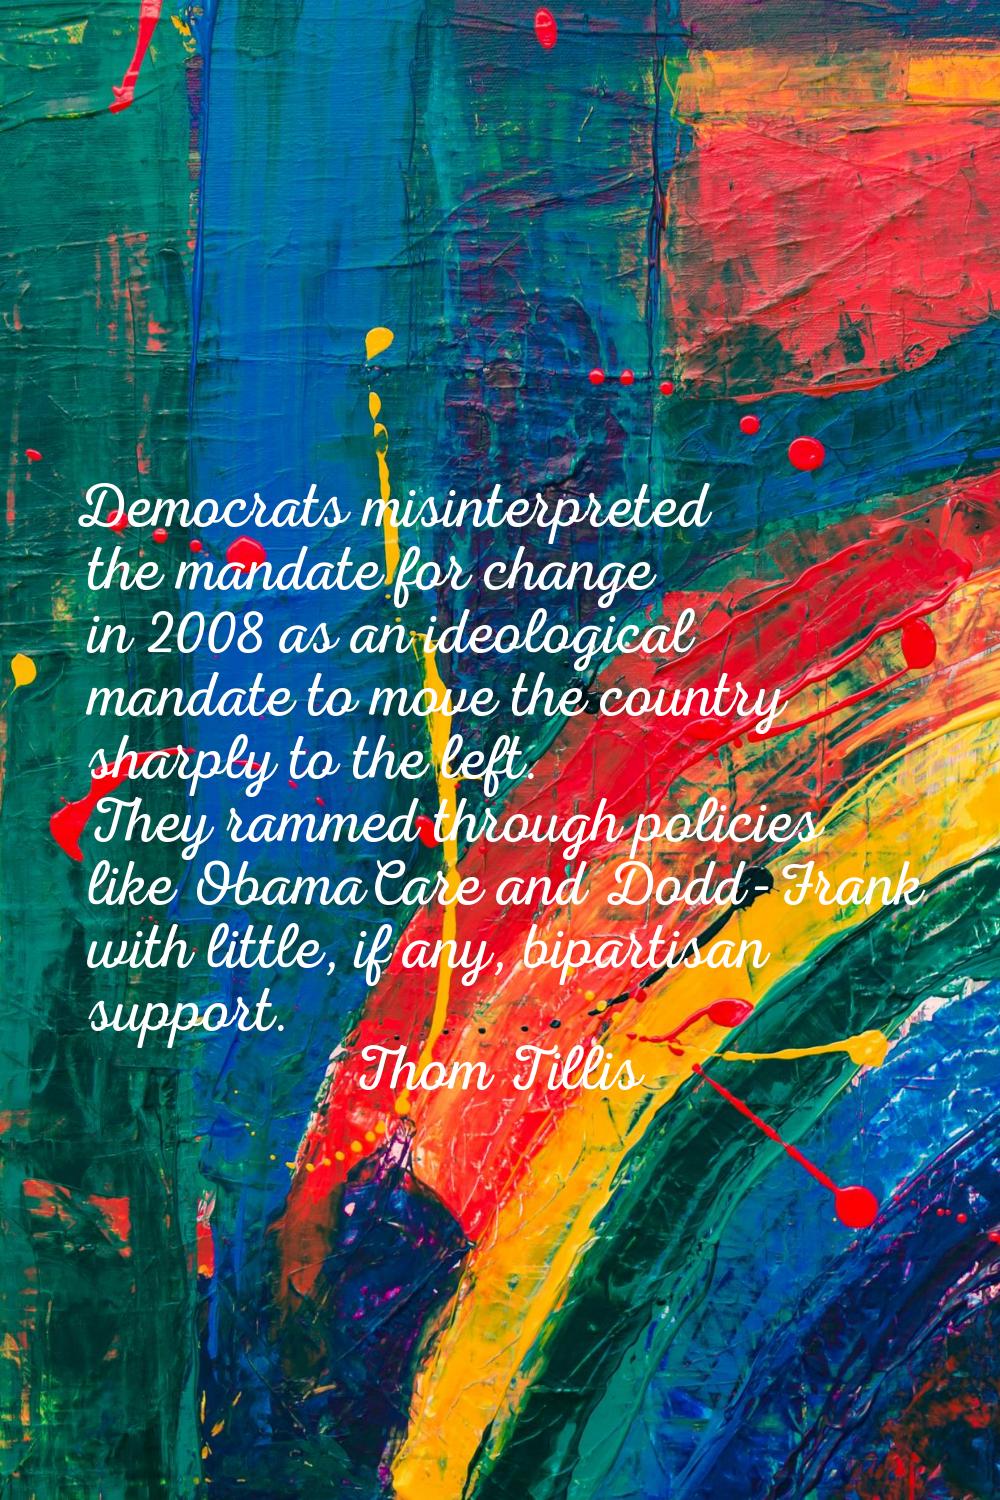 Democrats misinterpreted the mandate for change in 2008 as an ideological mandate to move the count